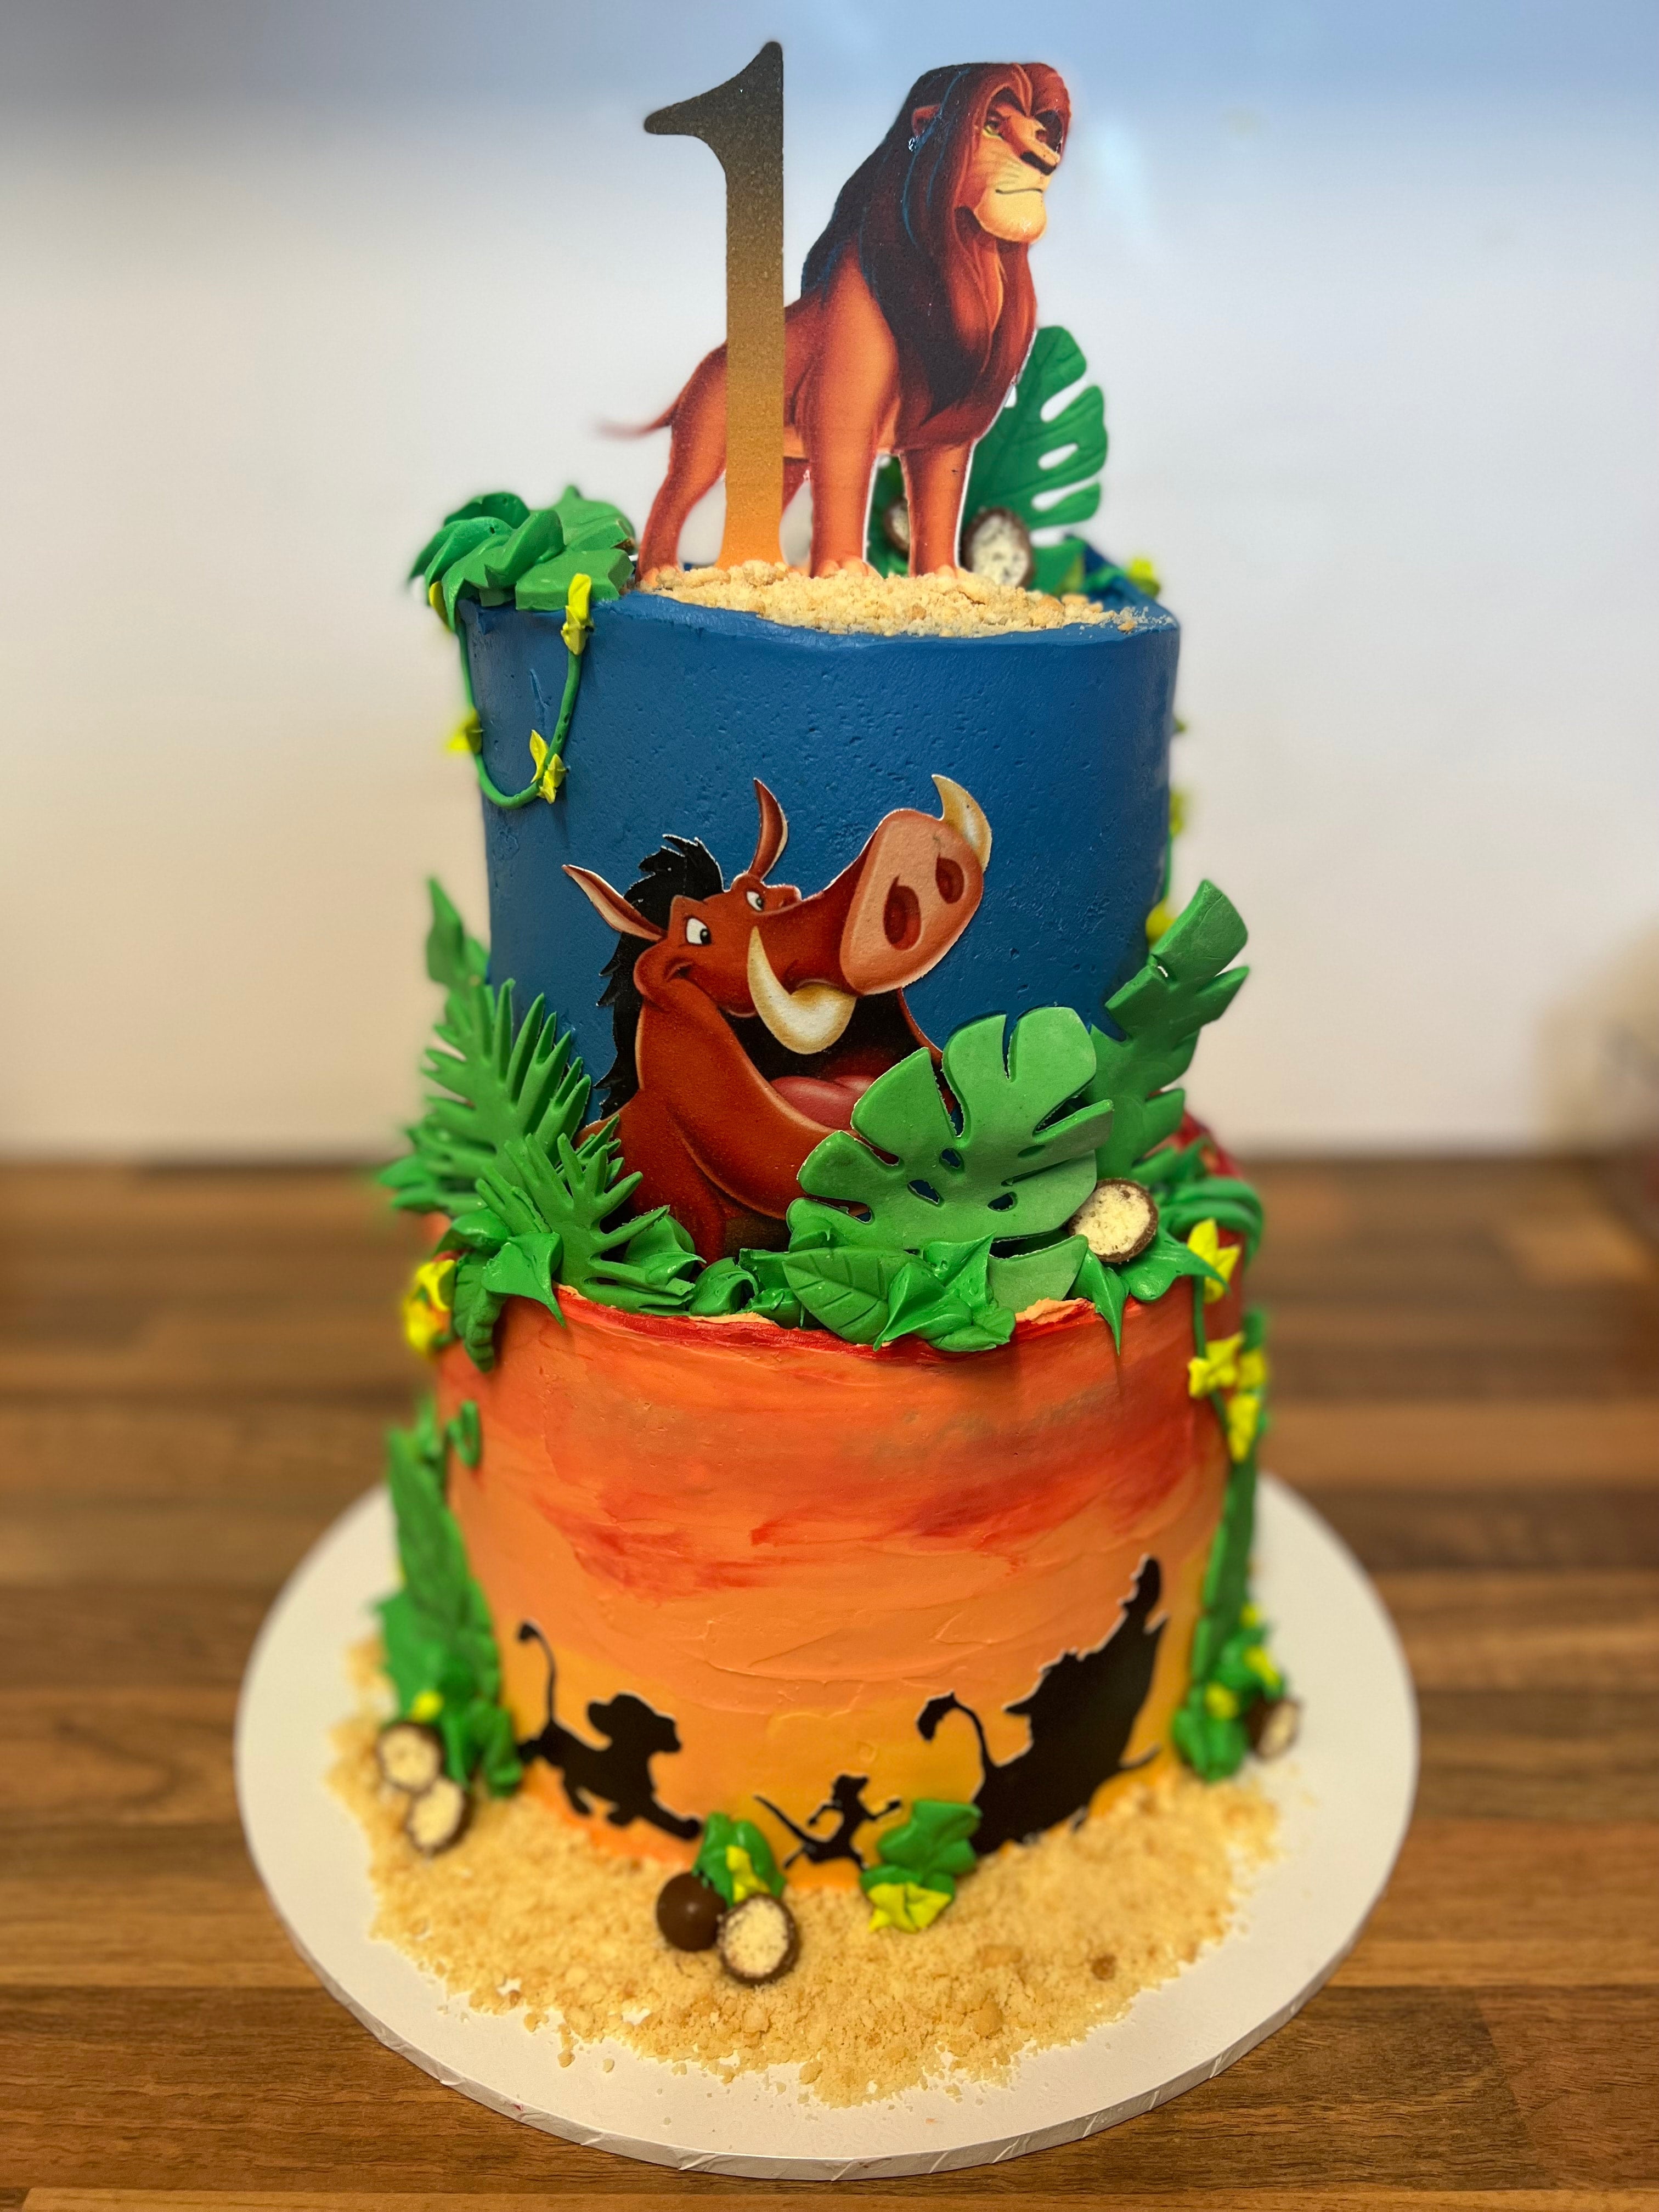 Gorgeous Lion King Cake Featuring Mufasa & Simba - Between The Pages Blog